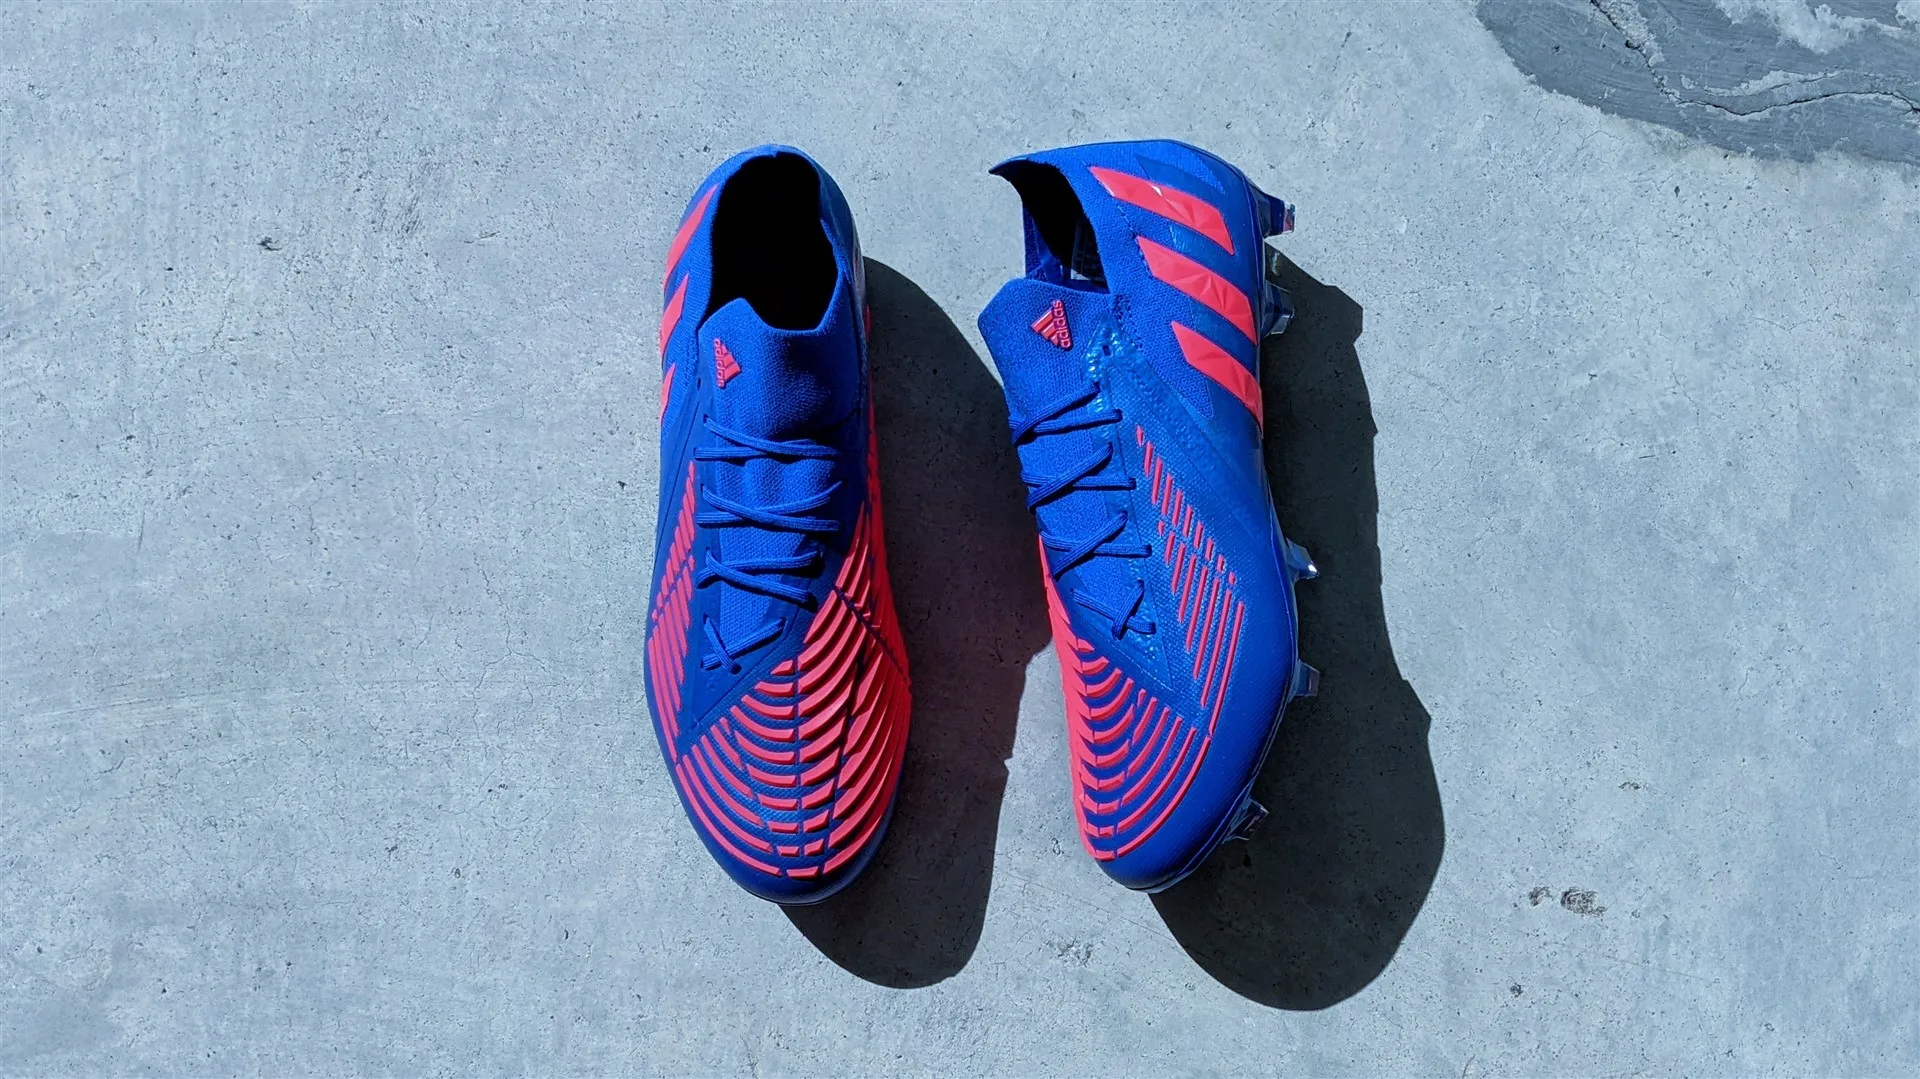 Adidas Predator Precision.3 FG 'Archive Pack' - Unboxing + On Feet